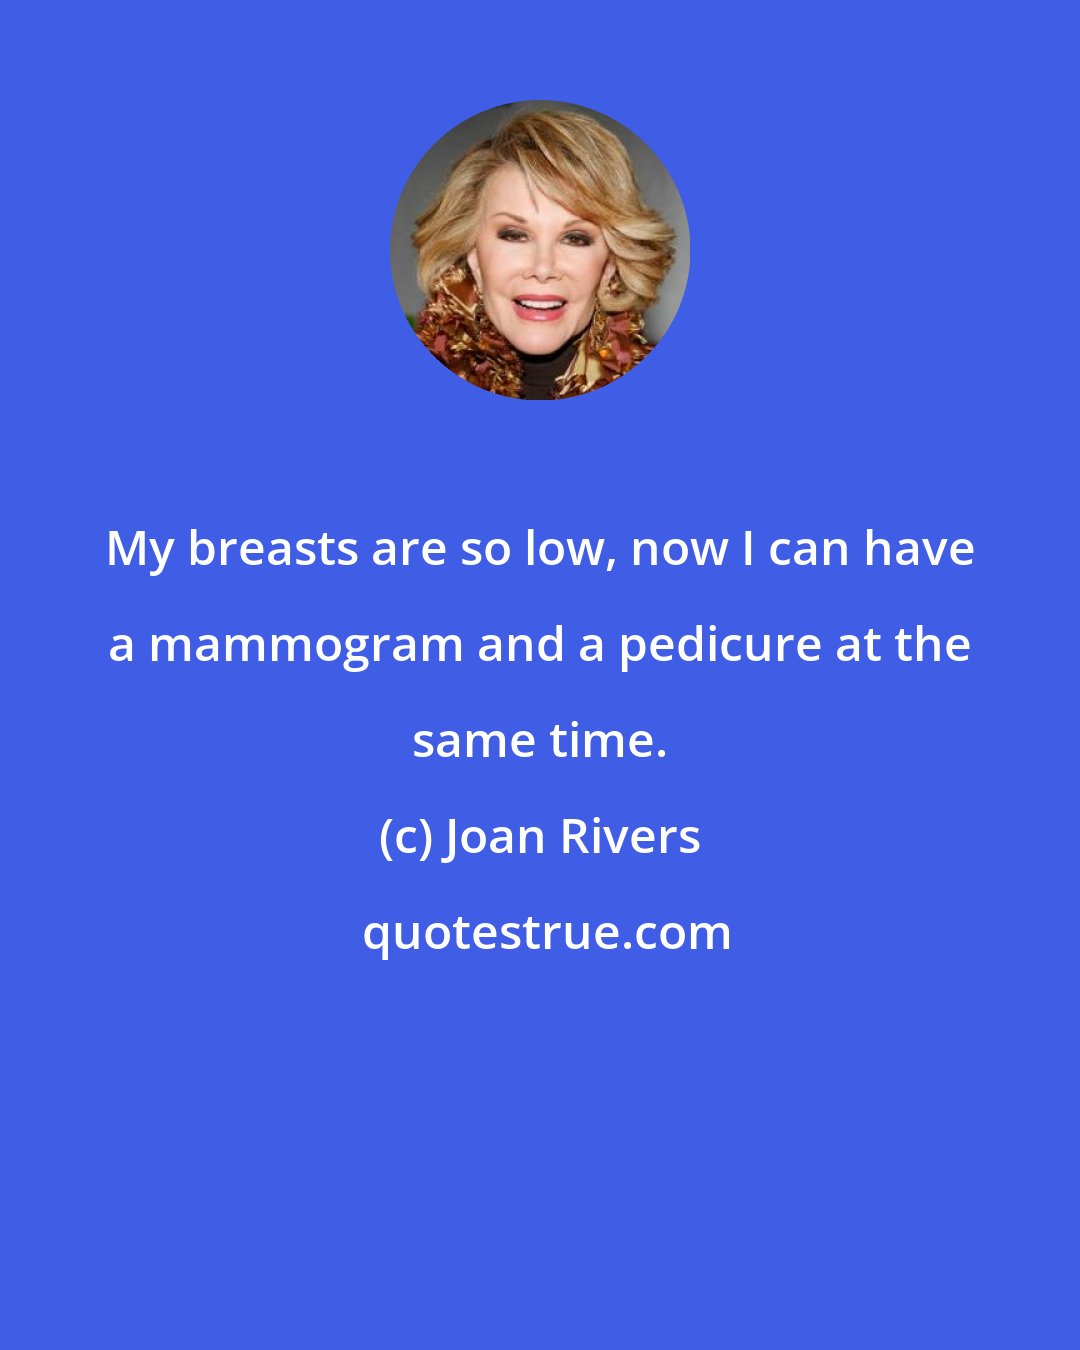 Joan Rivers: My breasts are so low, now I can have a mammogram and a pedicure at the same time.